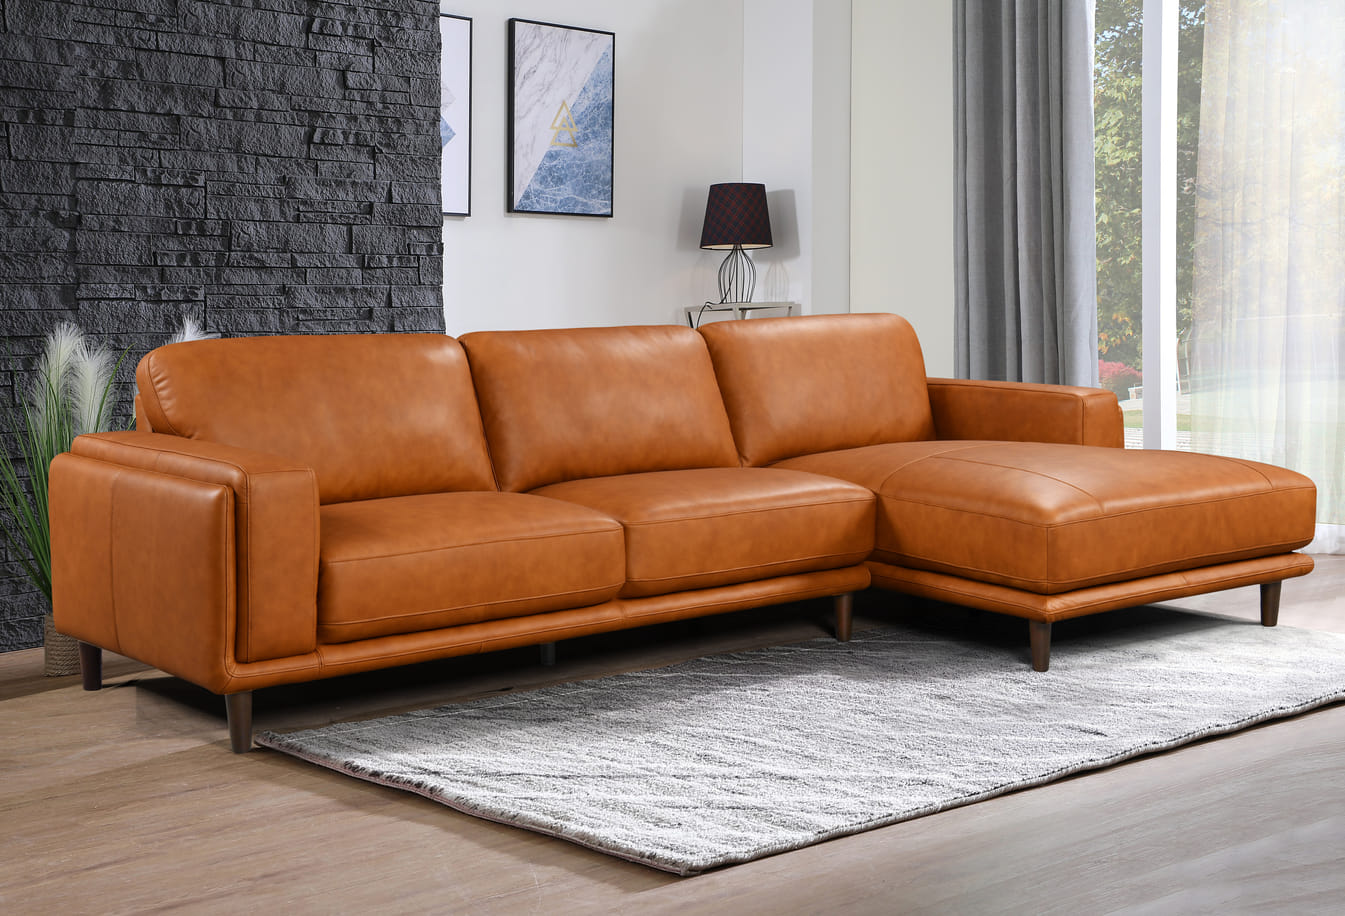 Danise Leather 3 Seat with Chaise Lounge